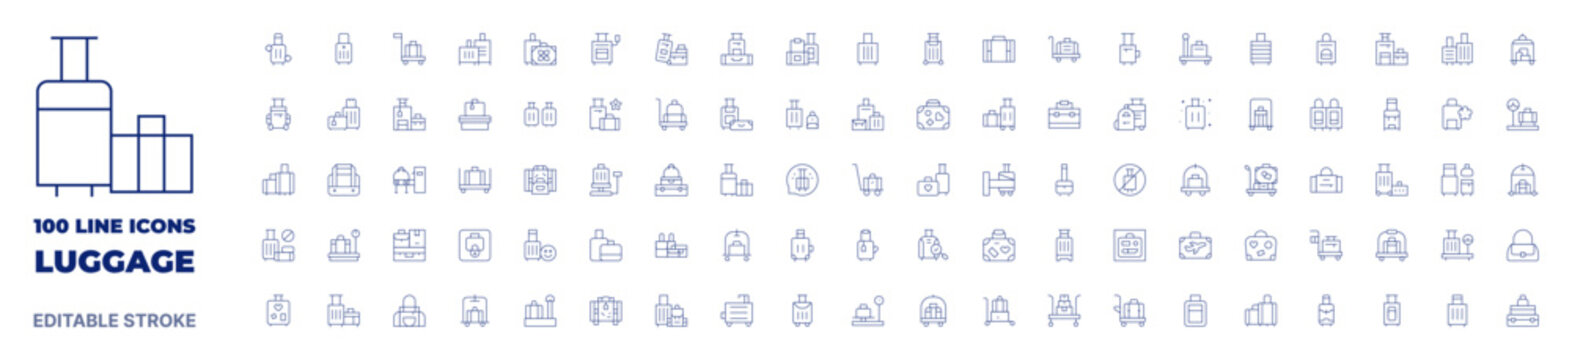 100 icons Luggage collection. Thin line icon. Editable stroke. Luggage icons for web and mobile app.